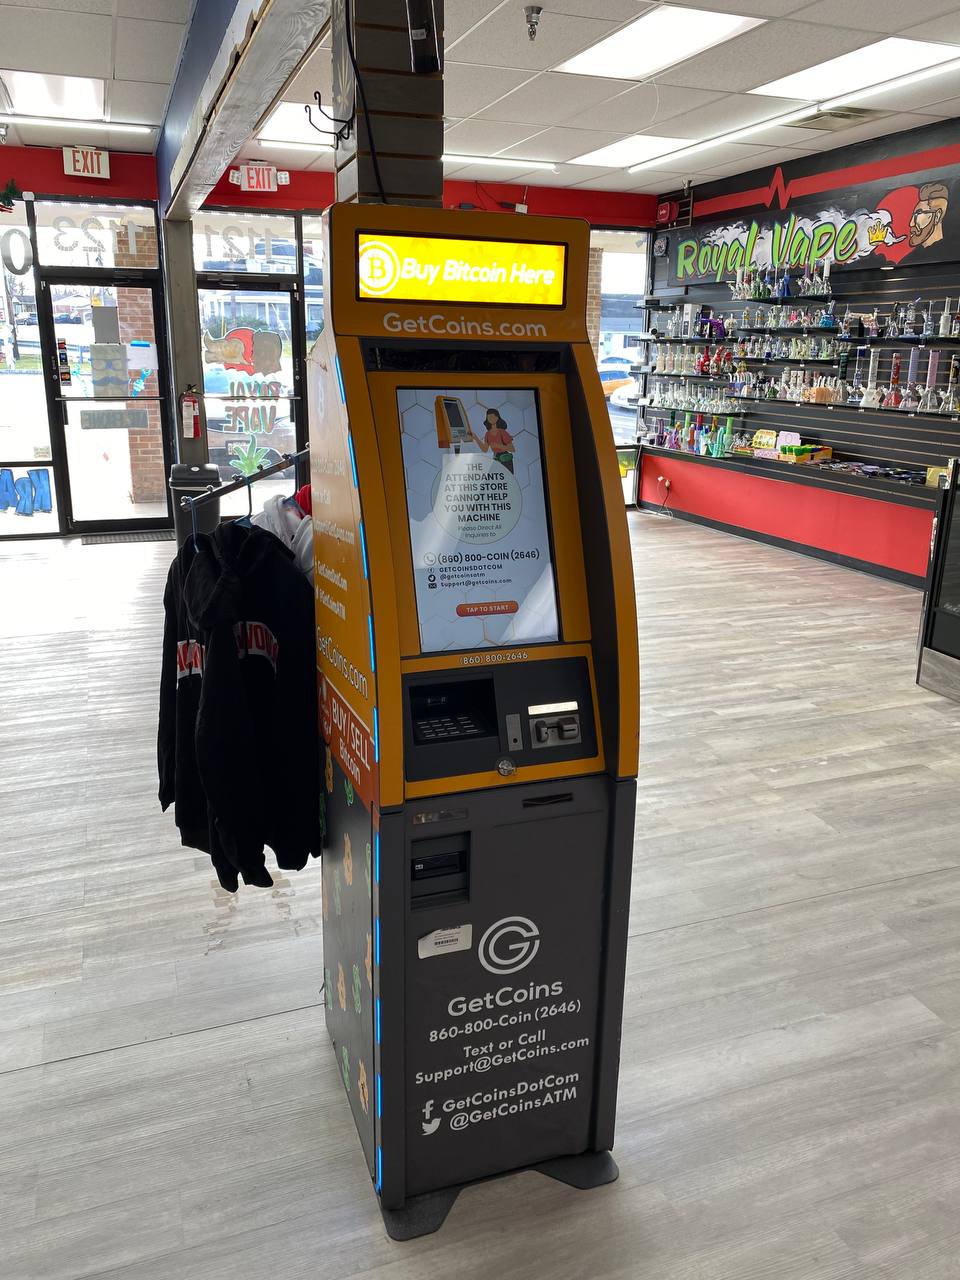 Getcoins - Bitcoin ATM - Inside of Royal Vape Smoke Shop in Milford, Ohio